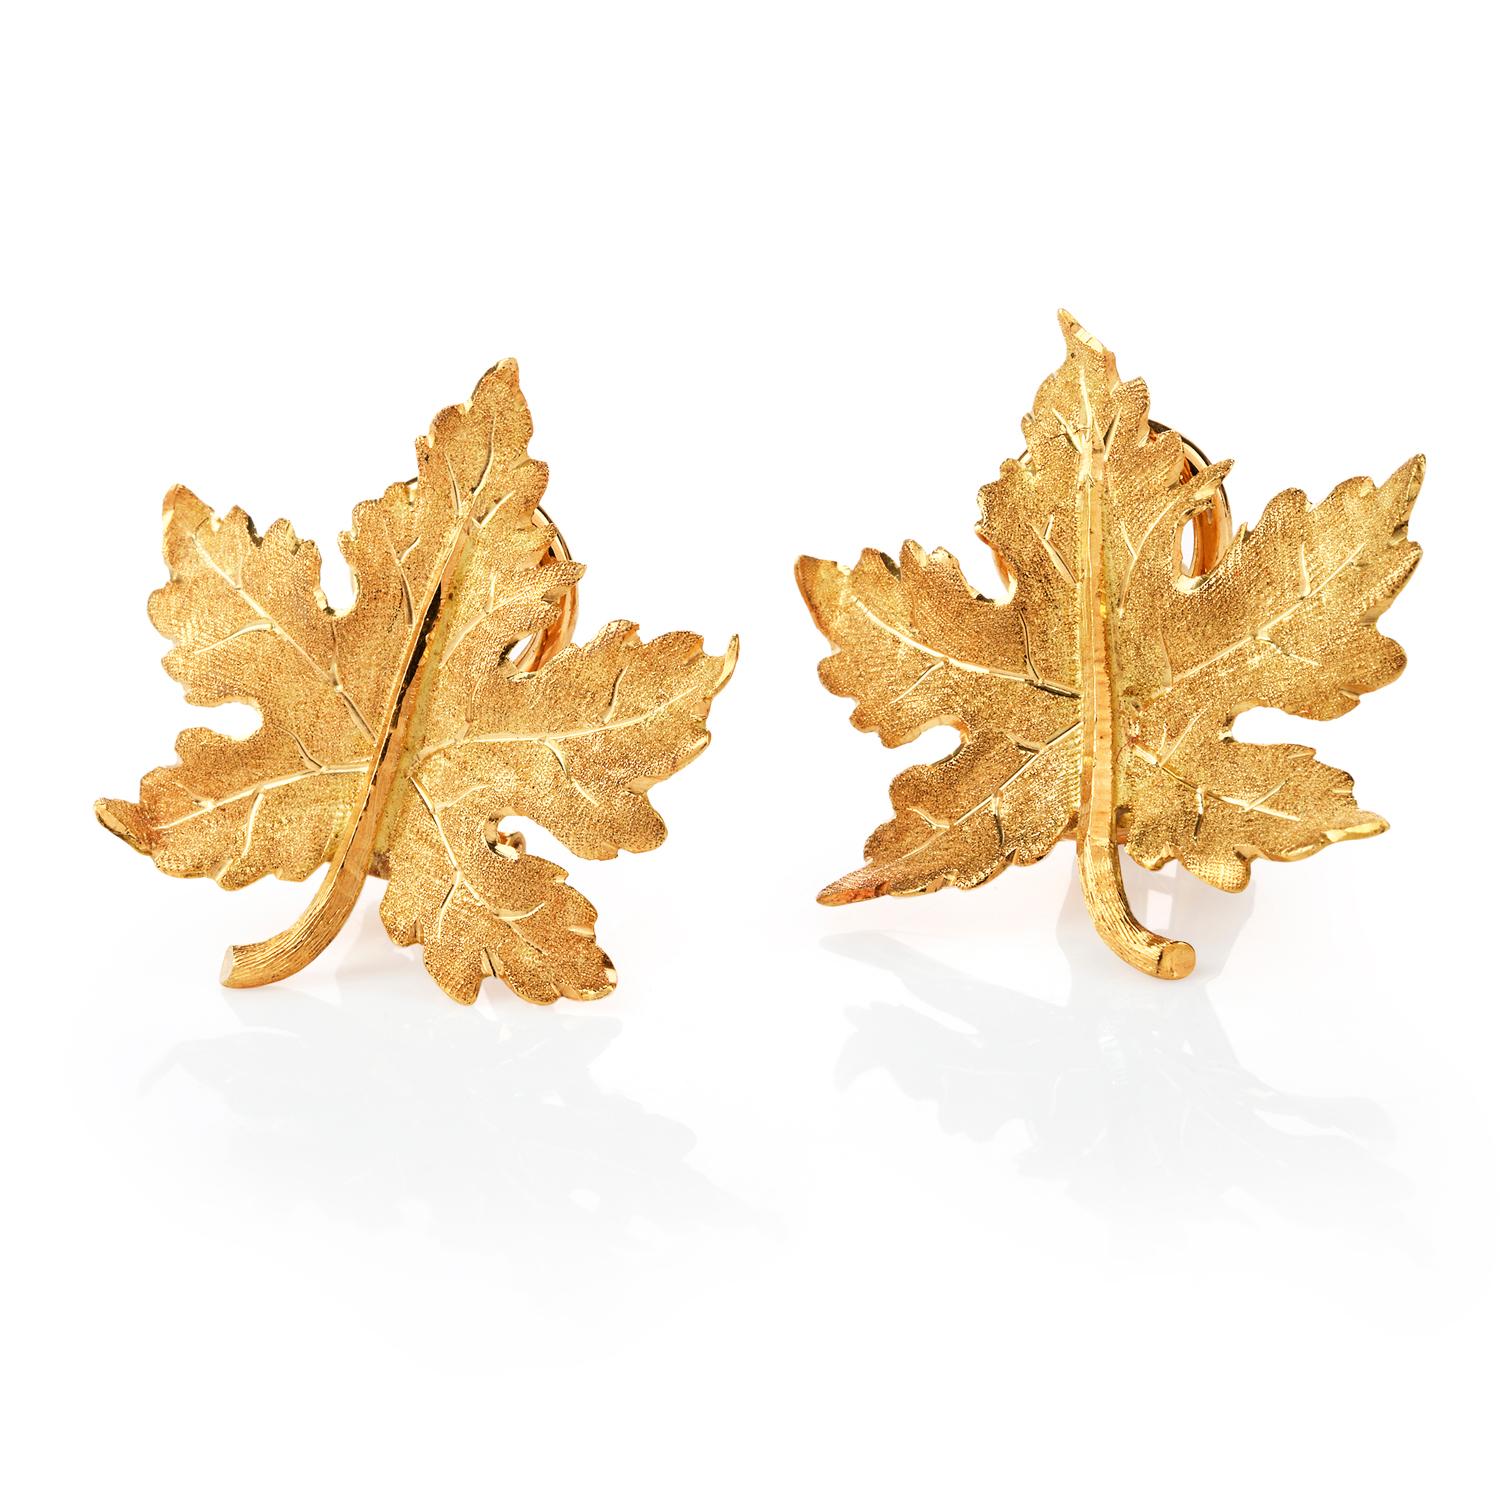 These Buccellati Earrings set the mood this fall season as they were inspired in 

an Autumn Leaf motif and crafted in 18K gold.

Measure appx. 24.28 x 23.66mm . These earrings are secured with Omega Clips.

Weight: approx. 6.7 Grams.

Remain in